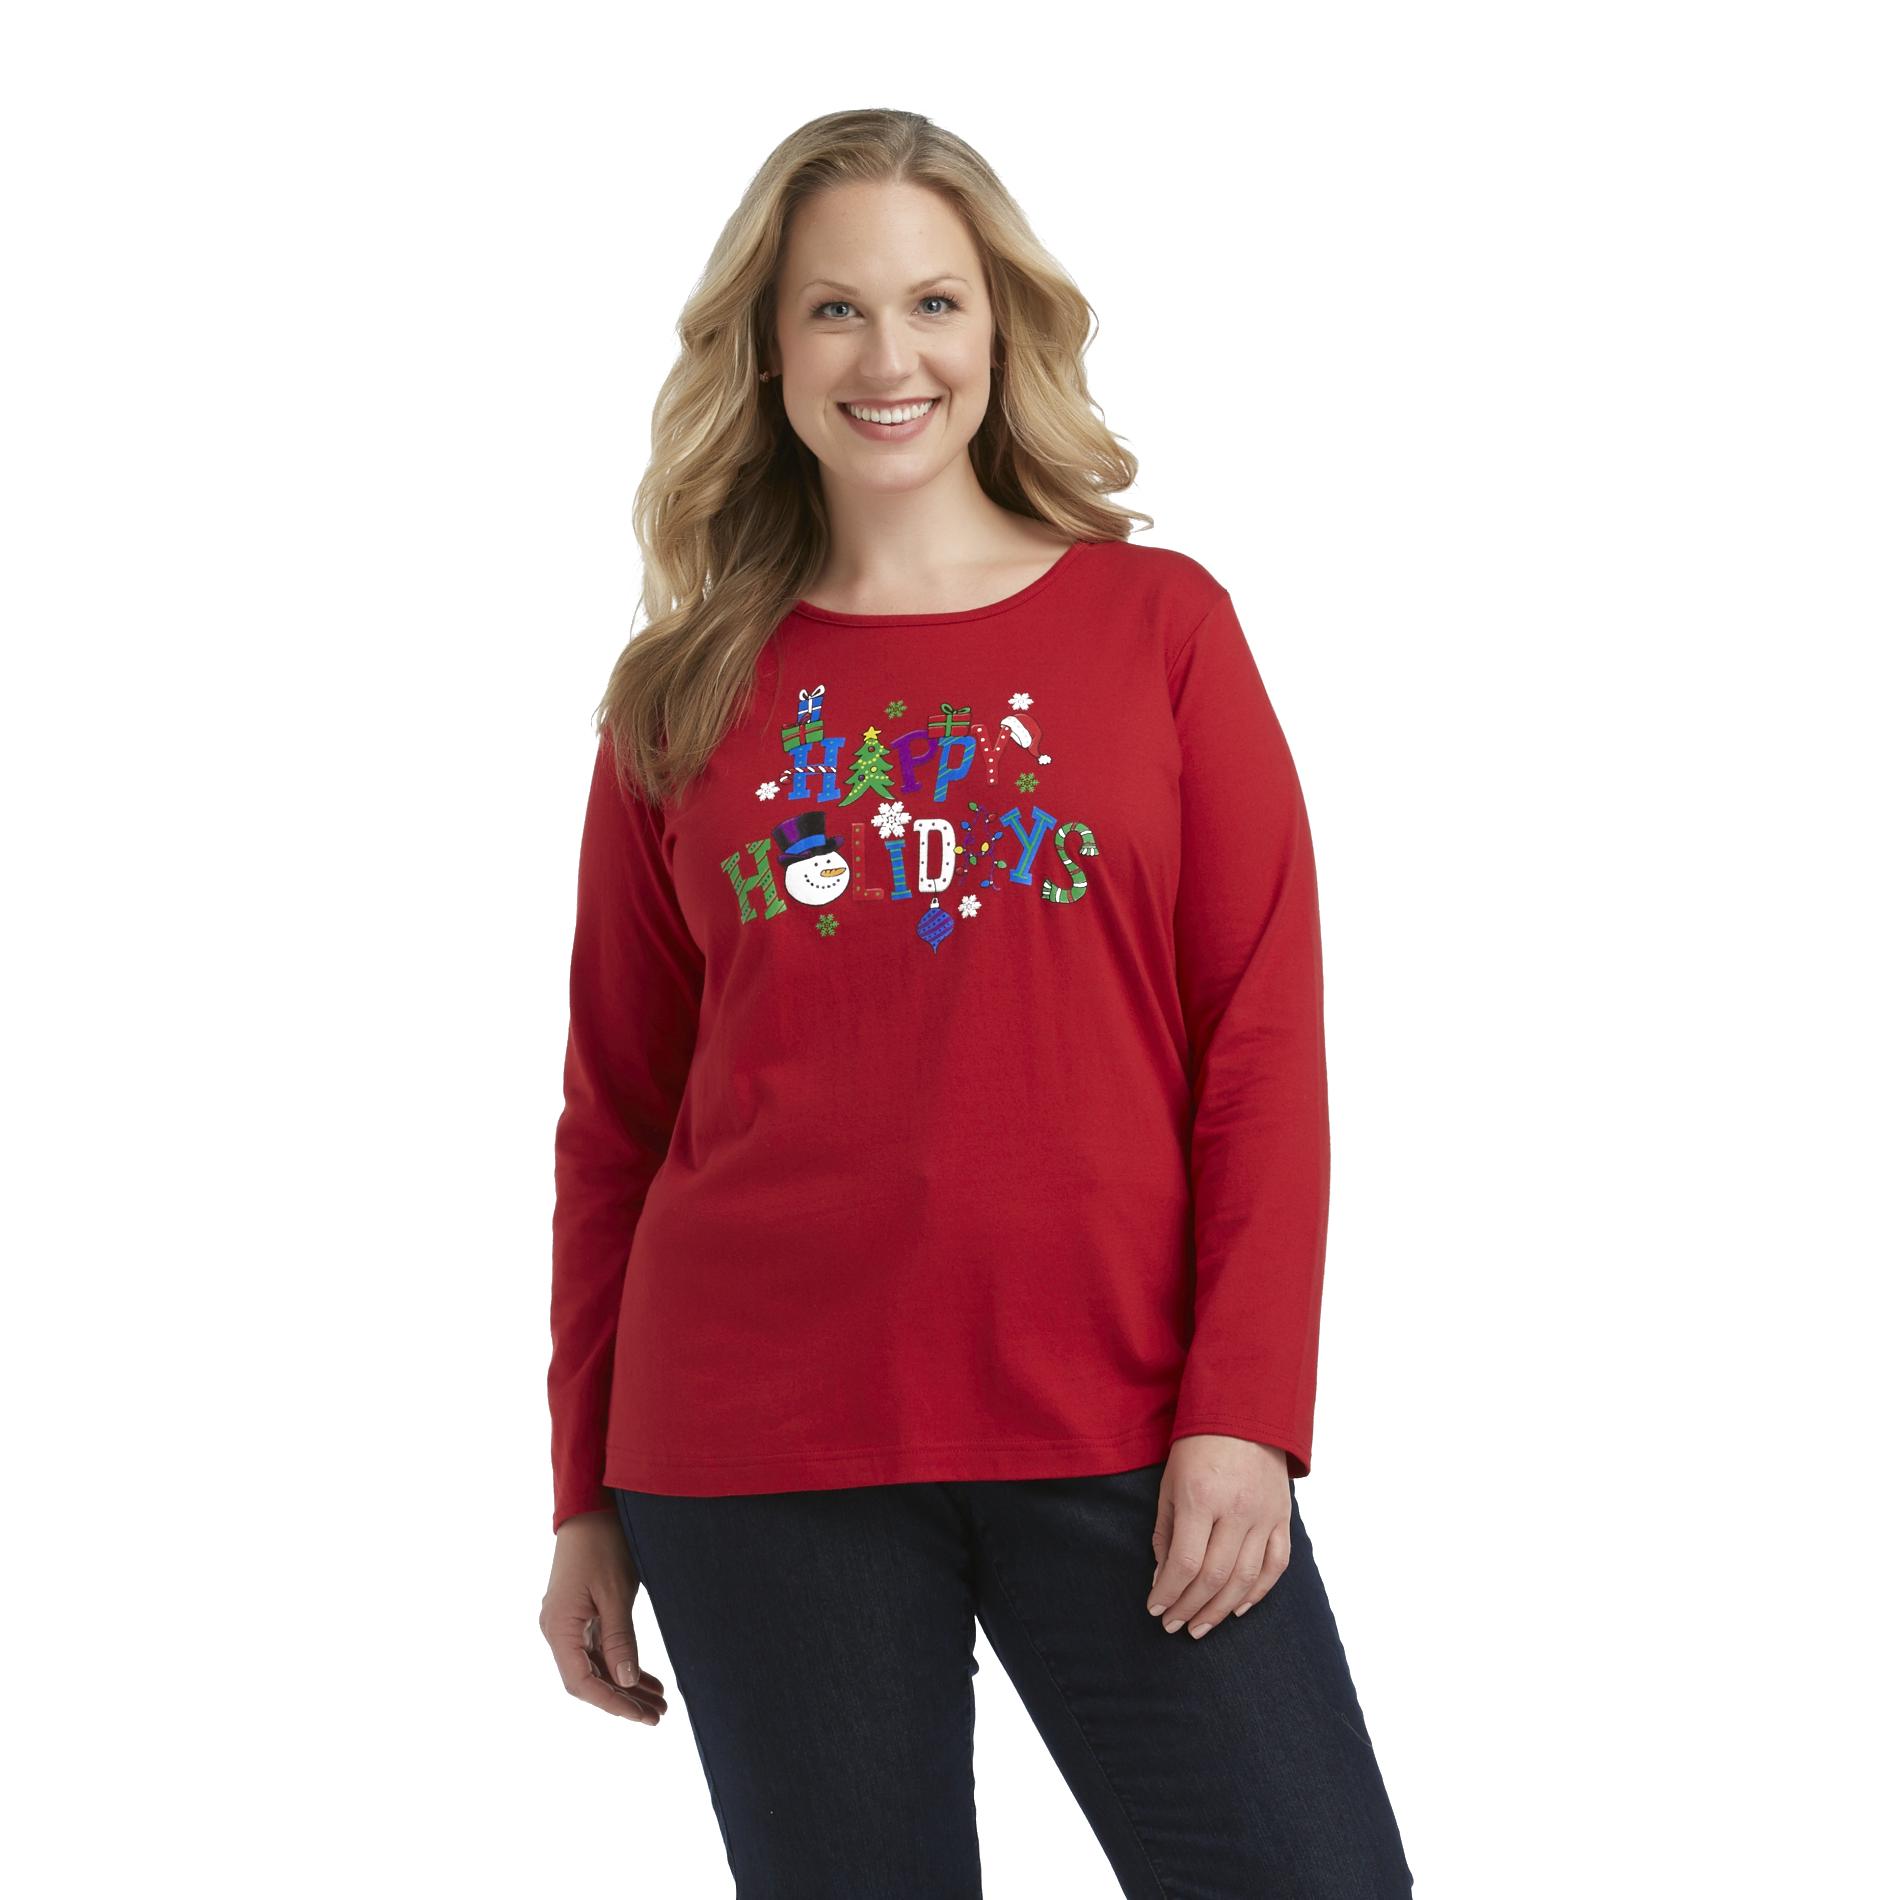 Holiday Editions Women's Plus Christmas T-Shirt - Happy Holidays